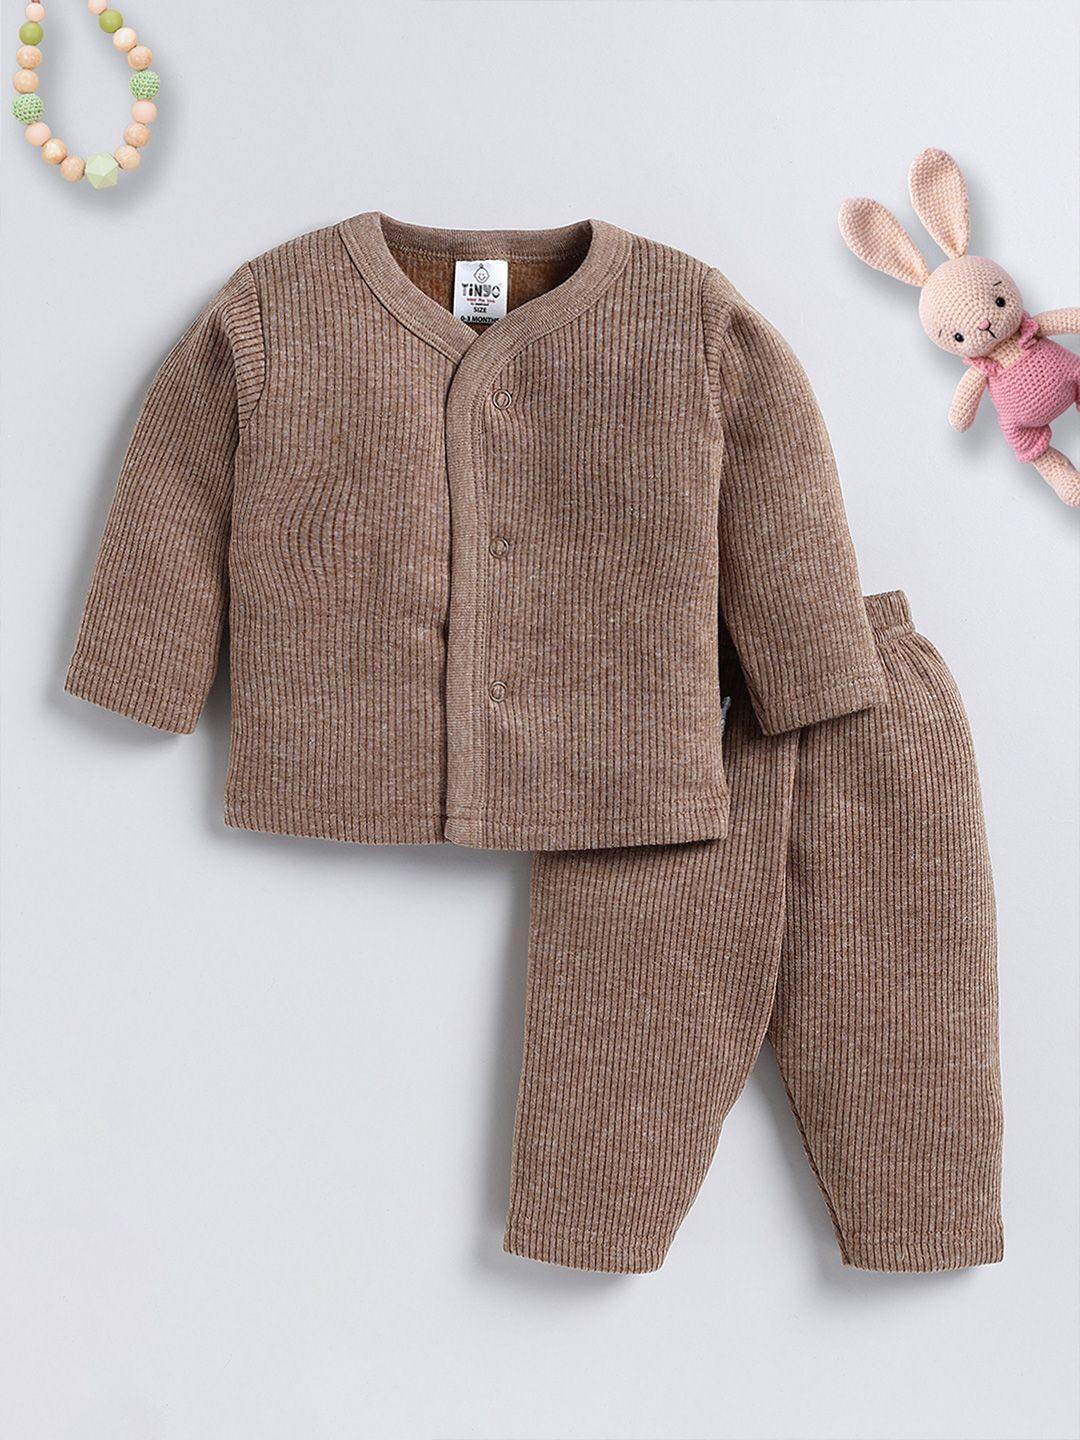 moms-love-unisex-kids-beige-striped-organic-cotton-cardigan-with-trousers